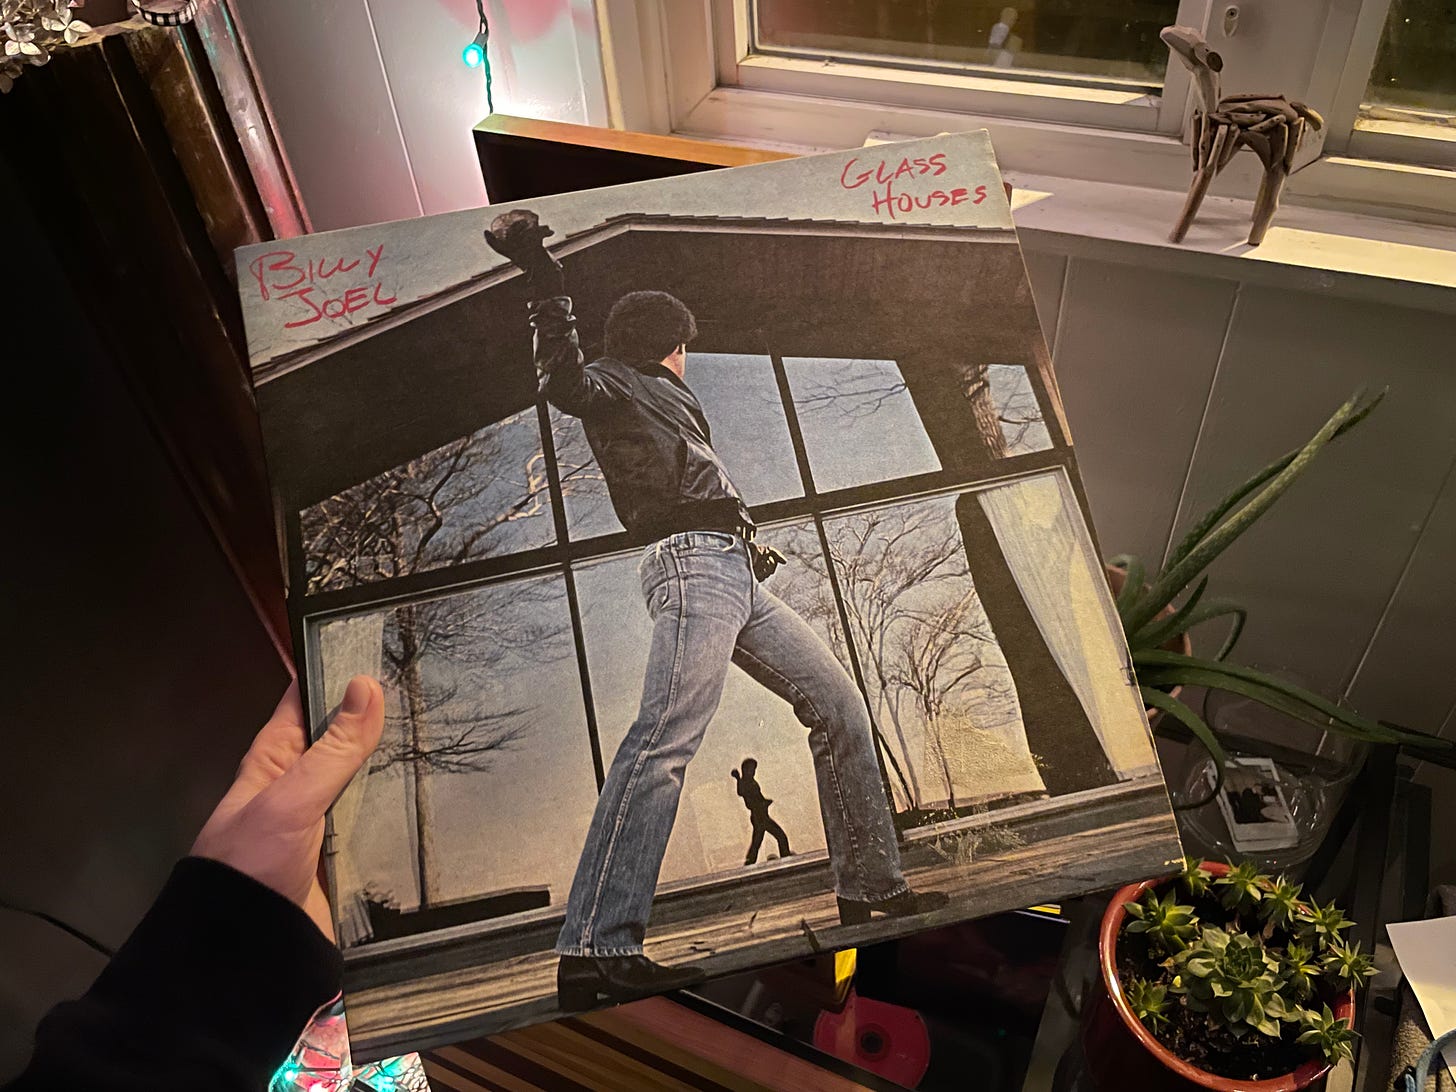 Photograph of a record of Billy Joel's Glass Houses, which features a man in a leather jacket in jeans throwing a rock at a large window.